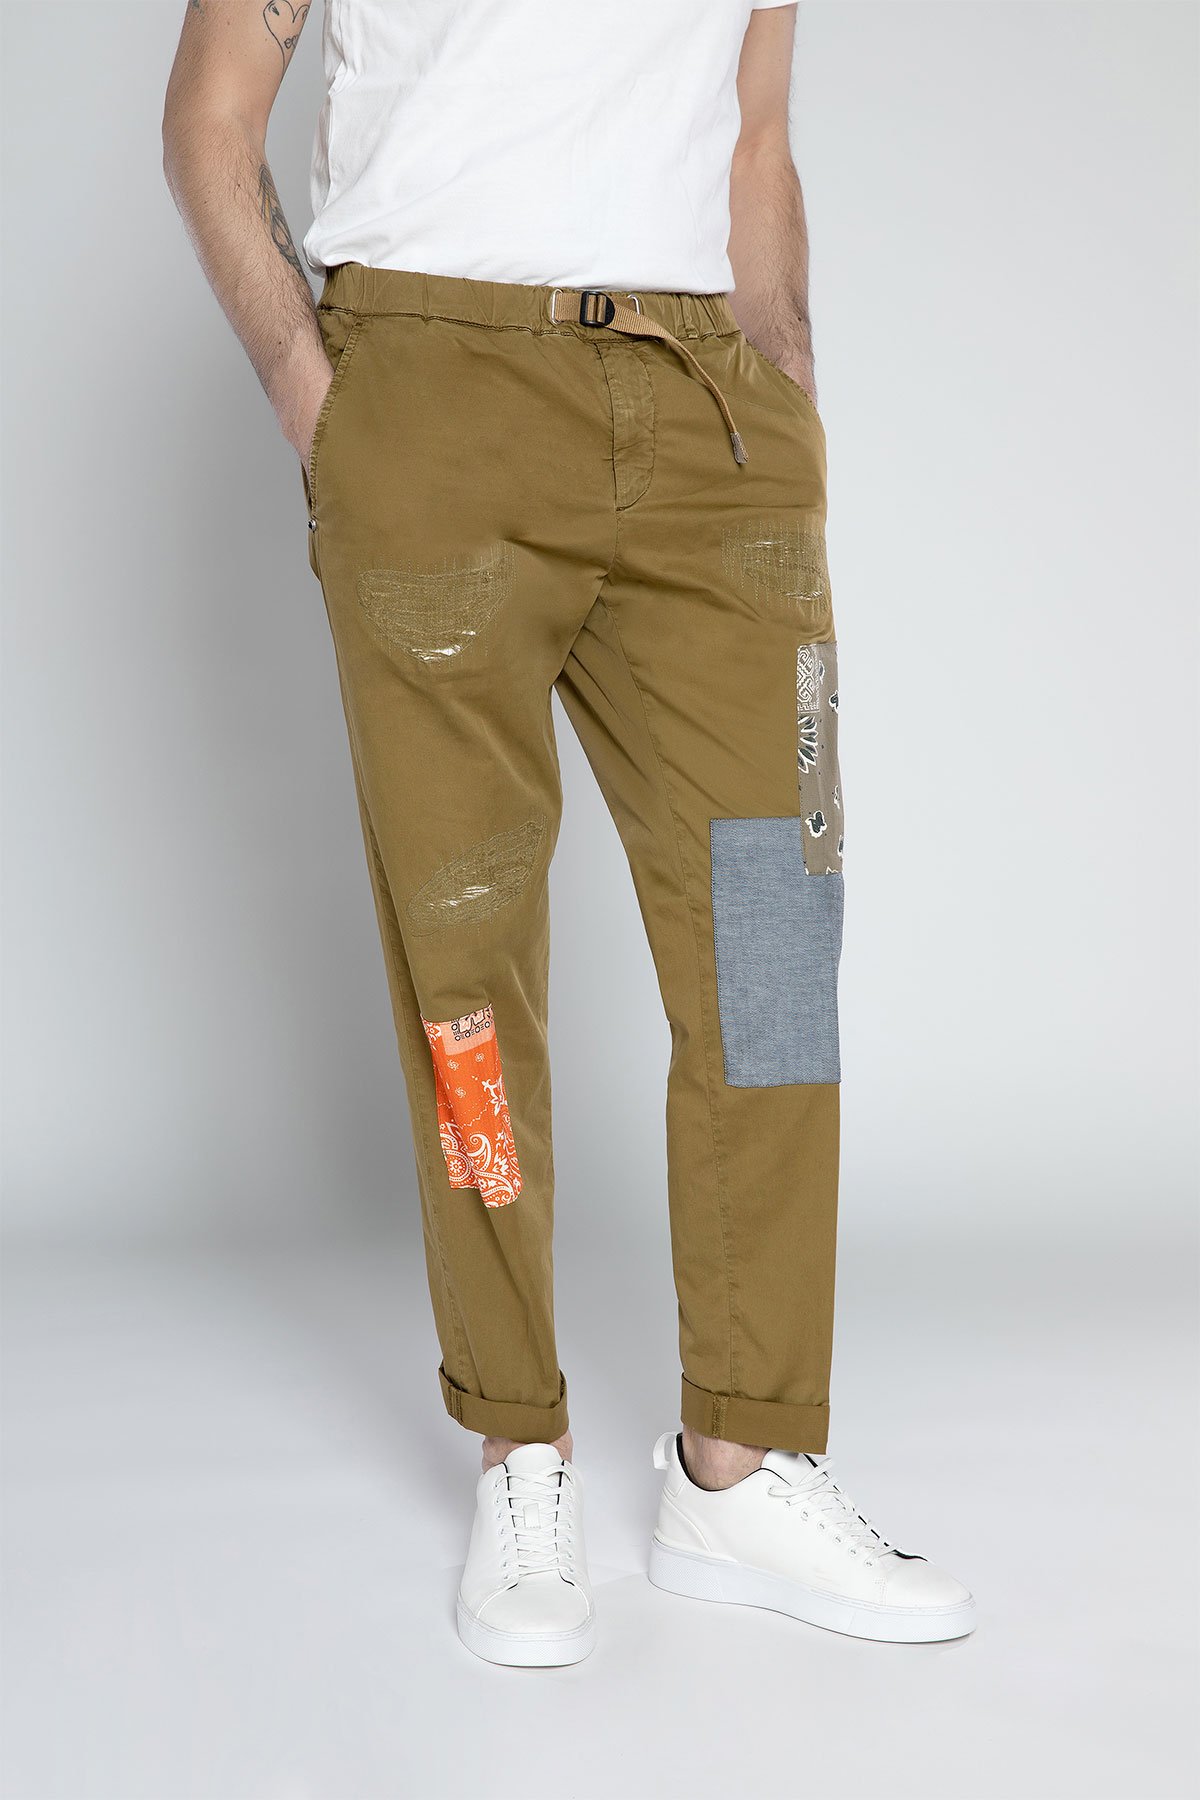 Sage Green Joggers Pant - White Sand